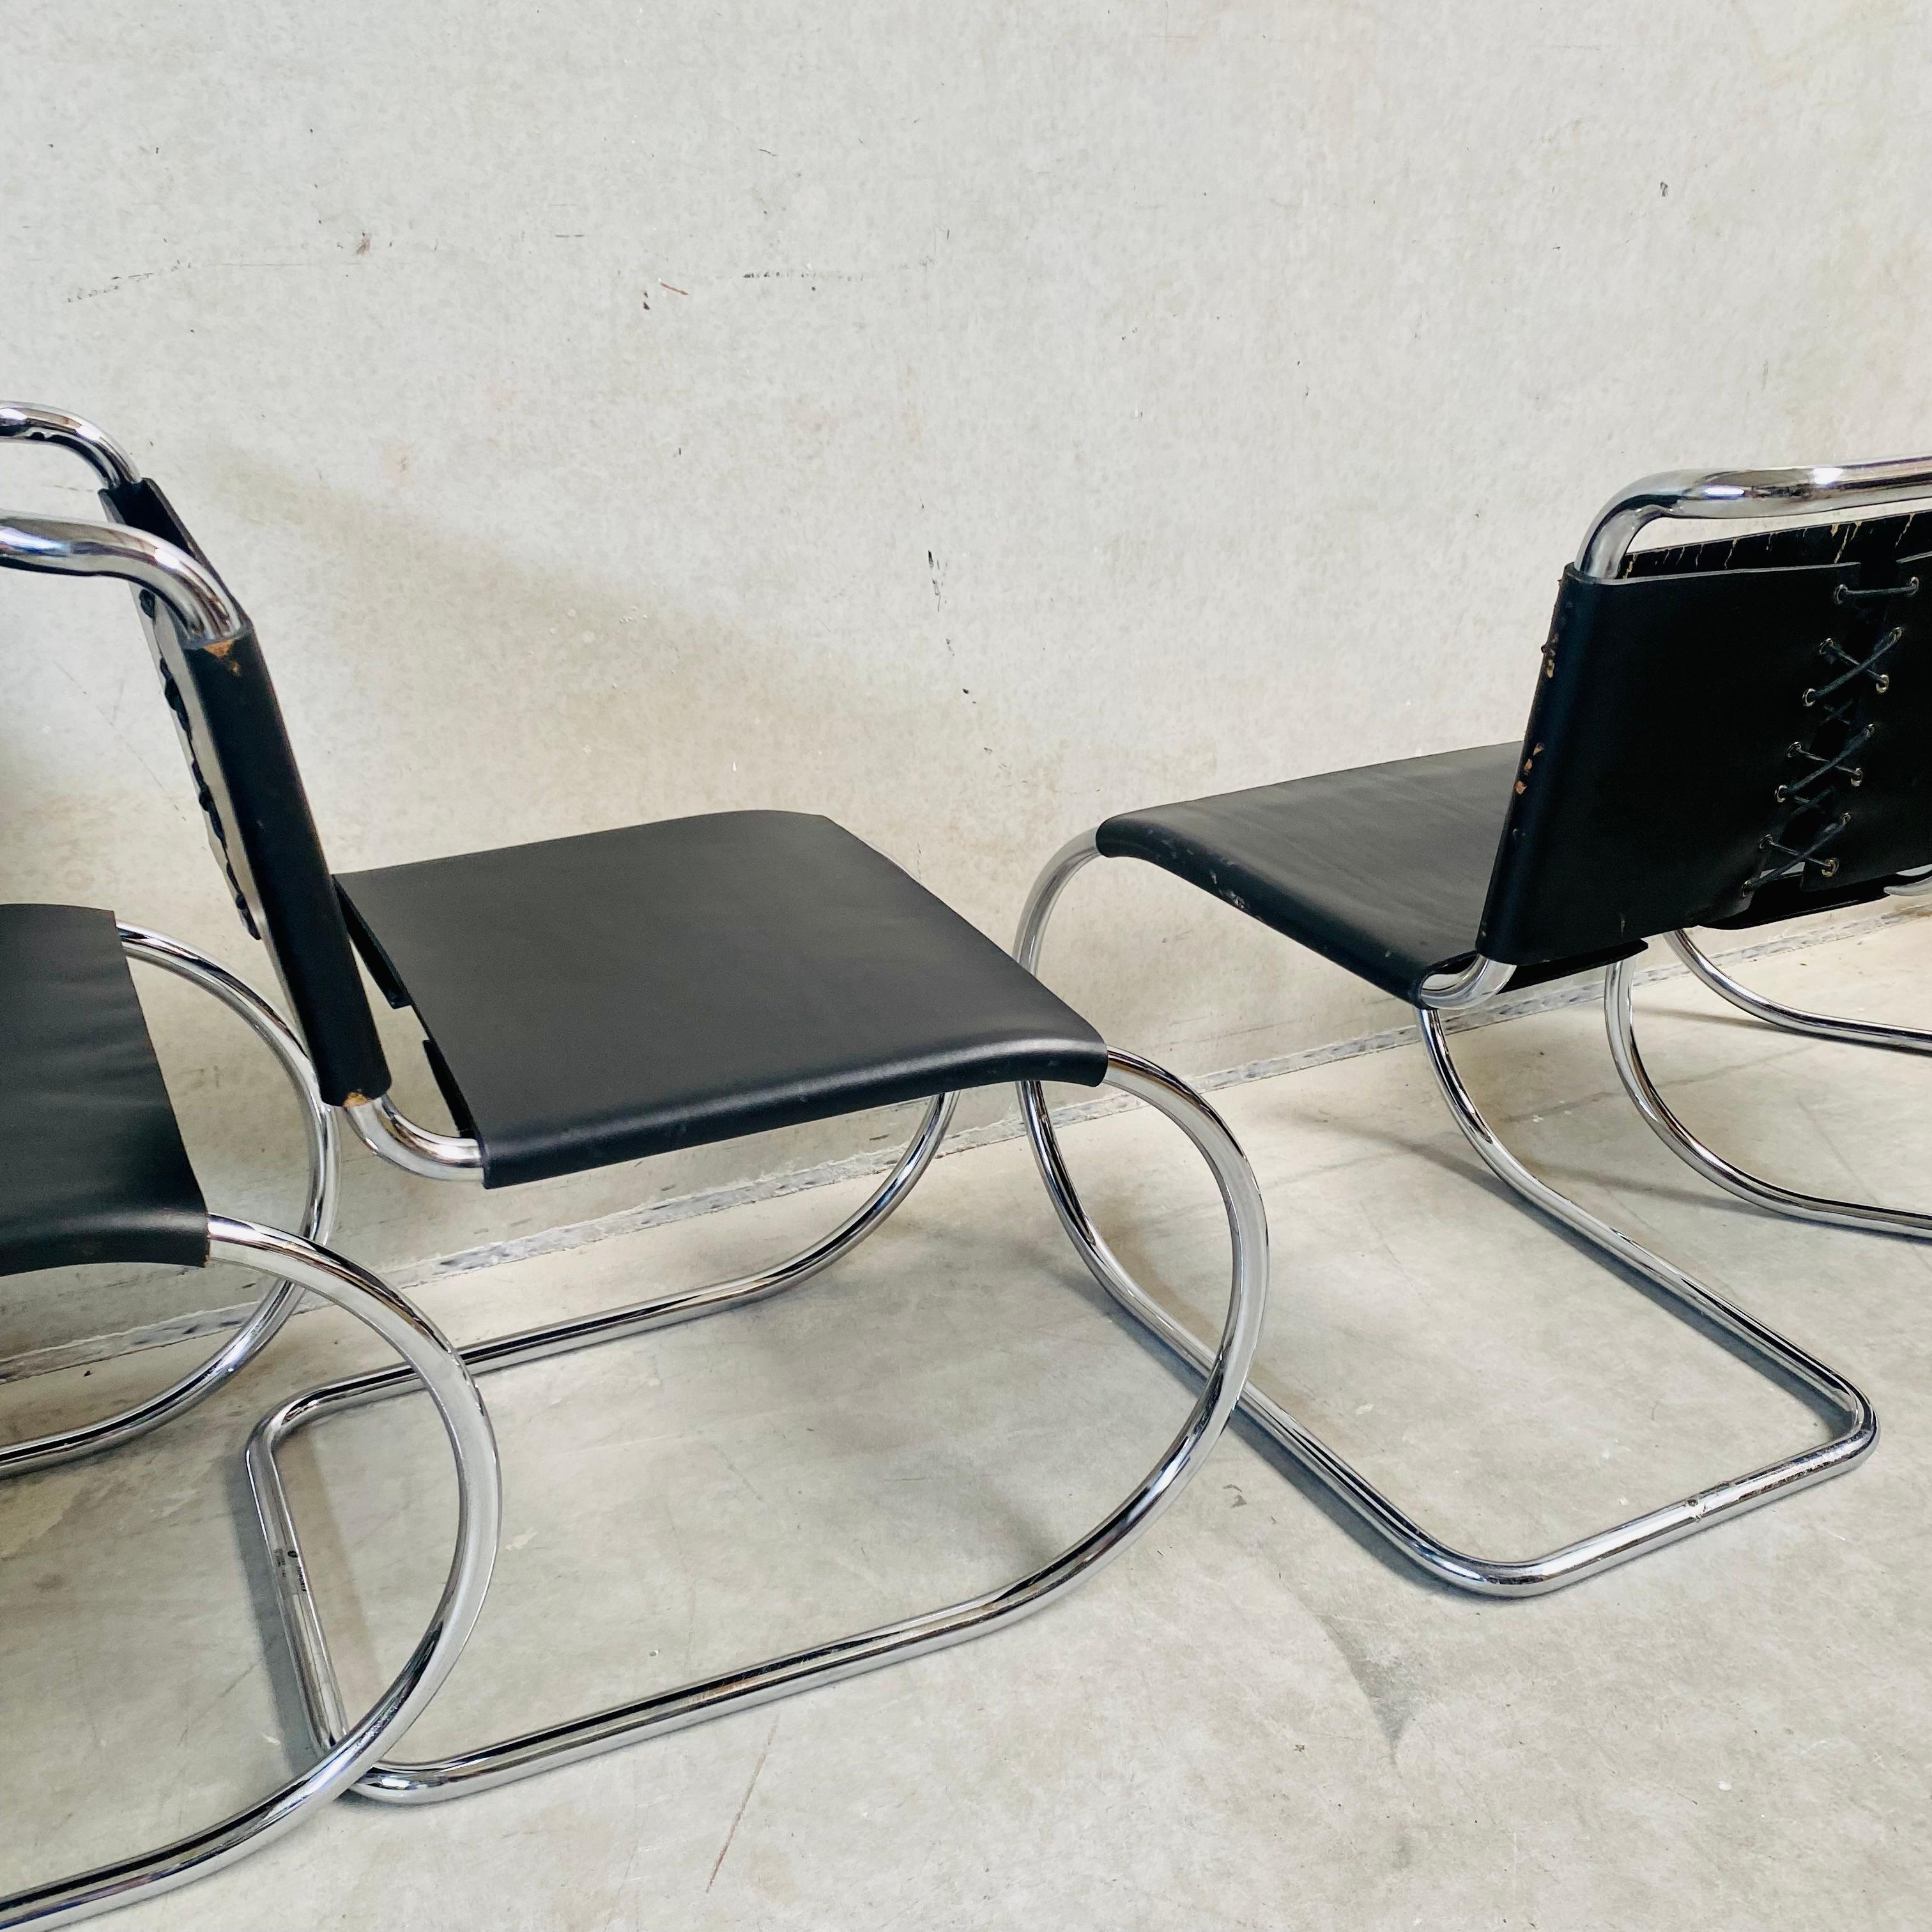 4 x Bononia Leather Dining Chairs Mr Series Mies Van Der Rohe Italy 1970 For Sale 5